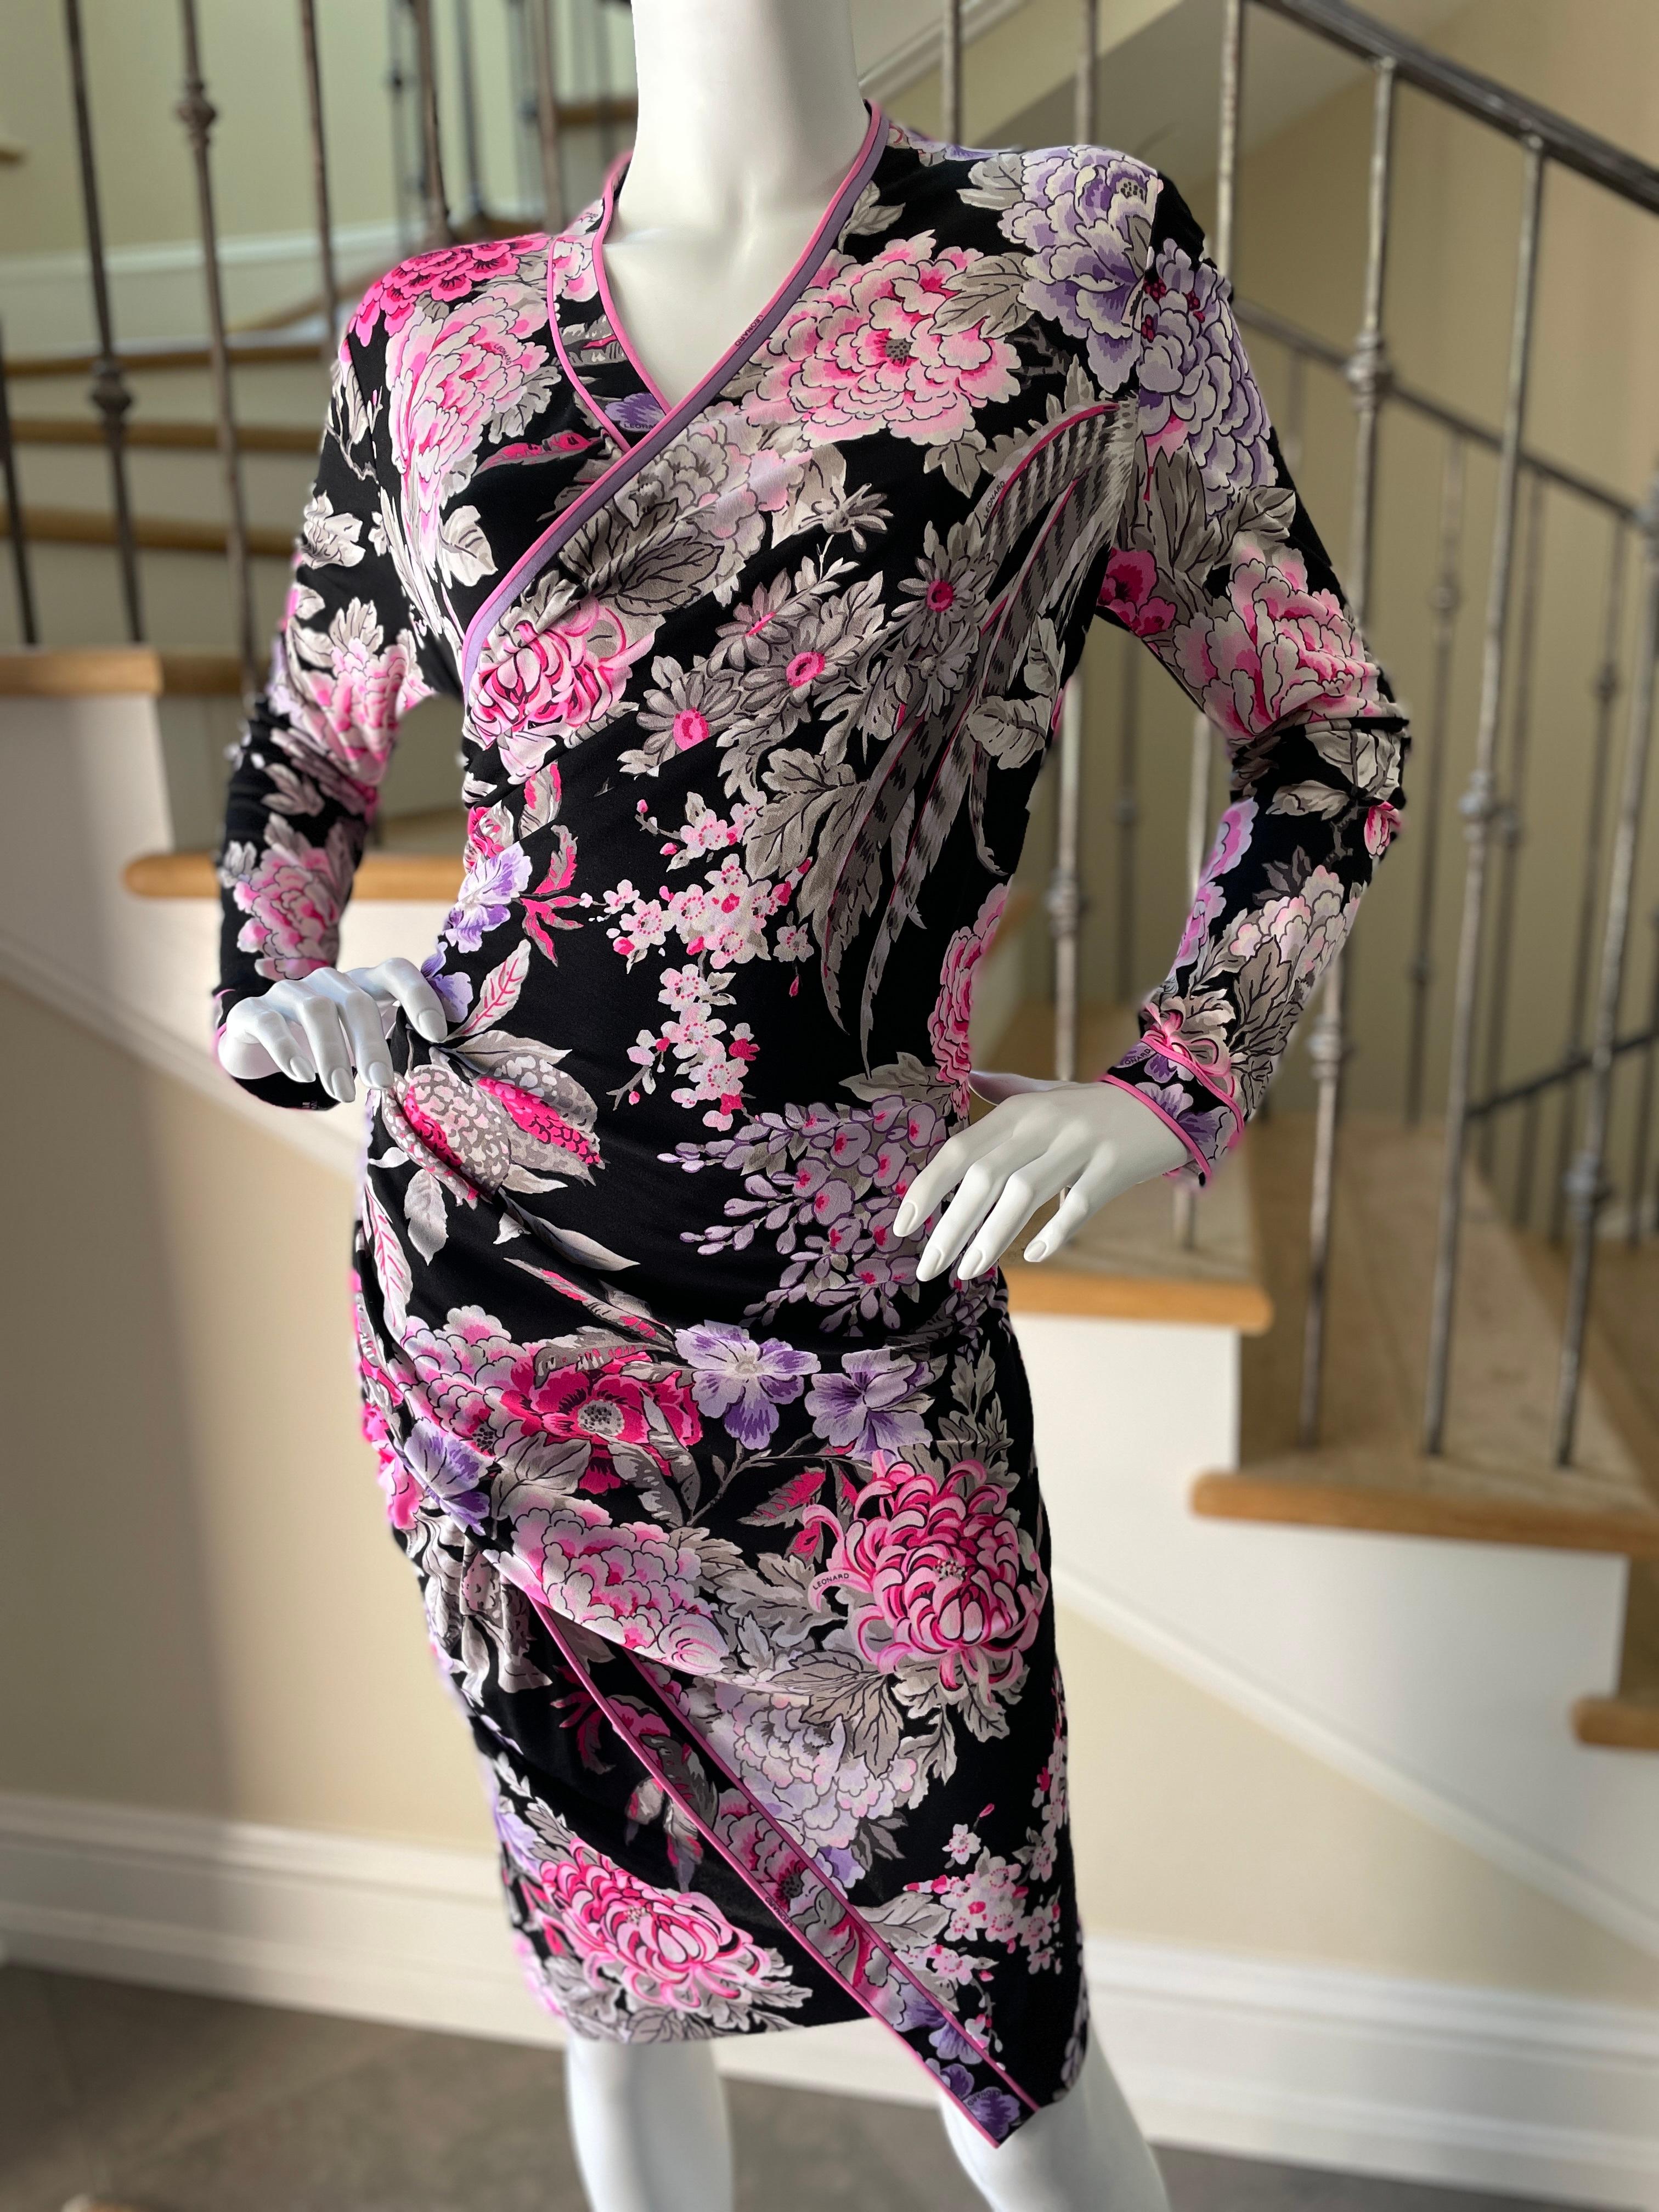 Leonard Paris Vintage Silk Jersey Floral Dress
So pretty, please use the zoom lens to see details.

Leonard Paris was a contemporary of Pucci, both houses creating brilliant 60's patterns on silk jersey.
Both were very expensive, and carried in the